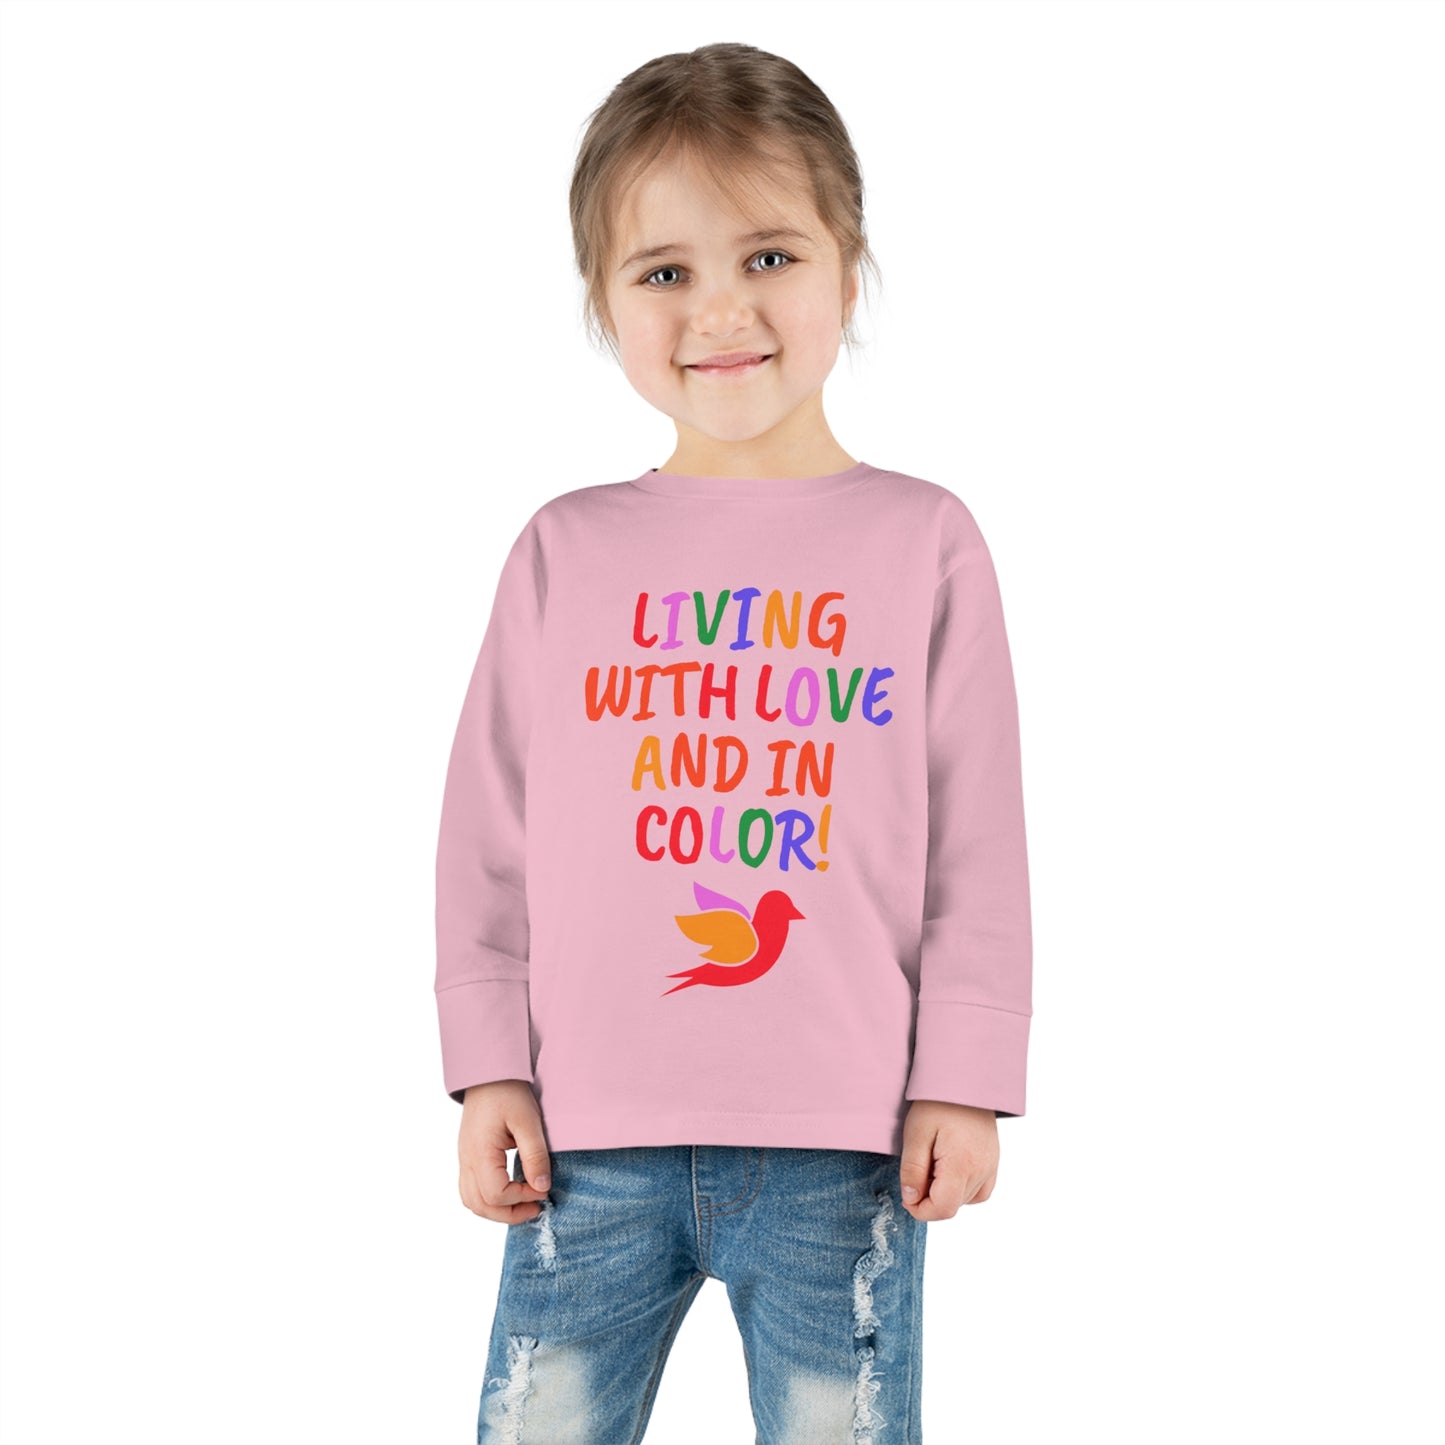 Love & Color Toddler Long Sleeve Tee (3 colors)